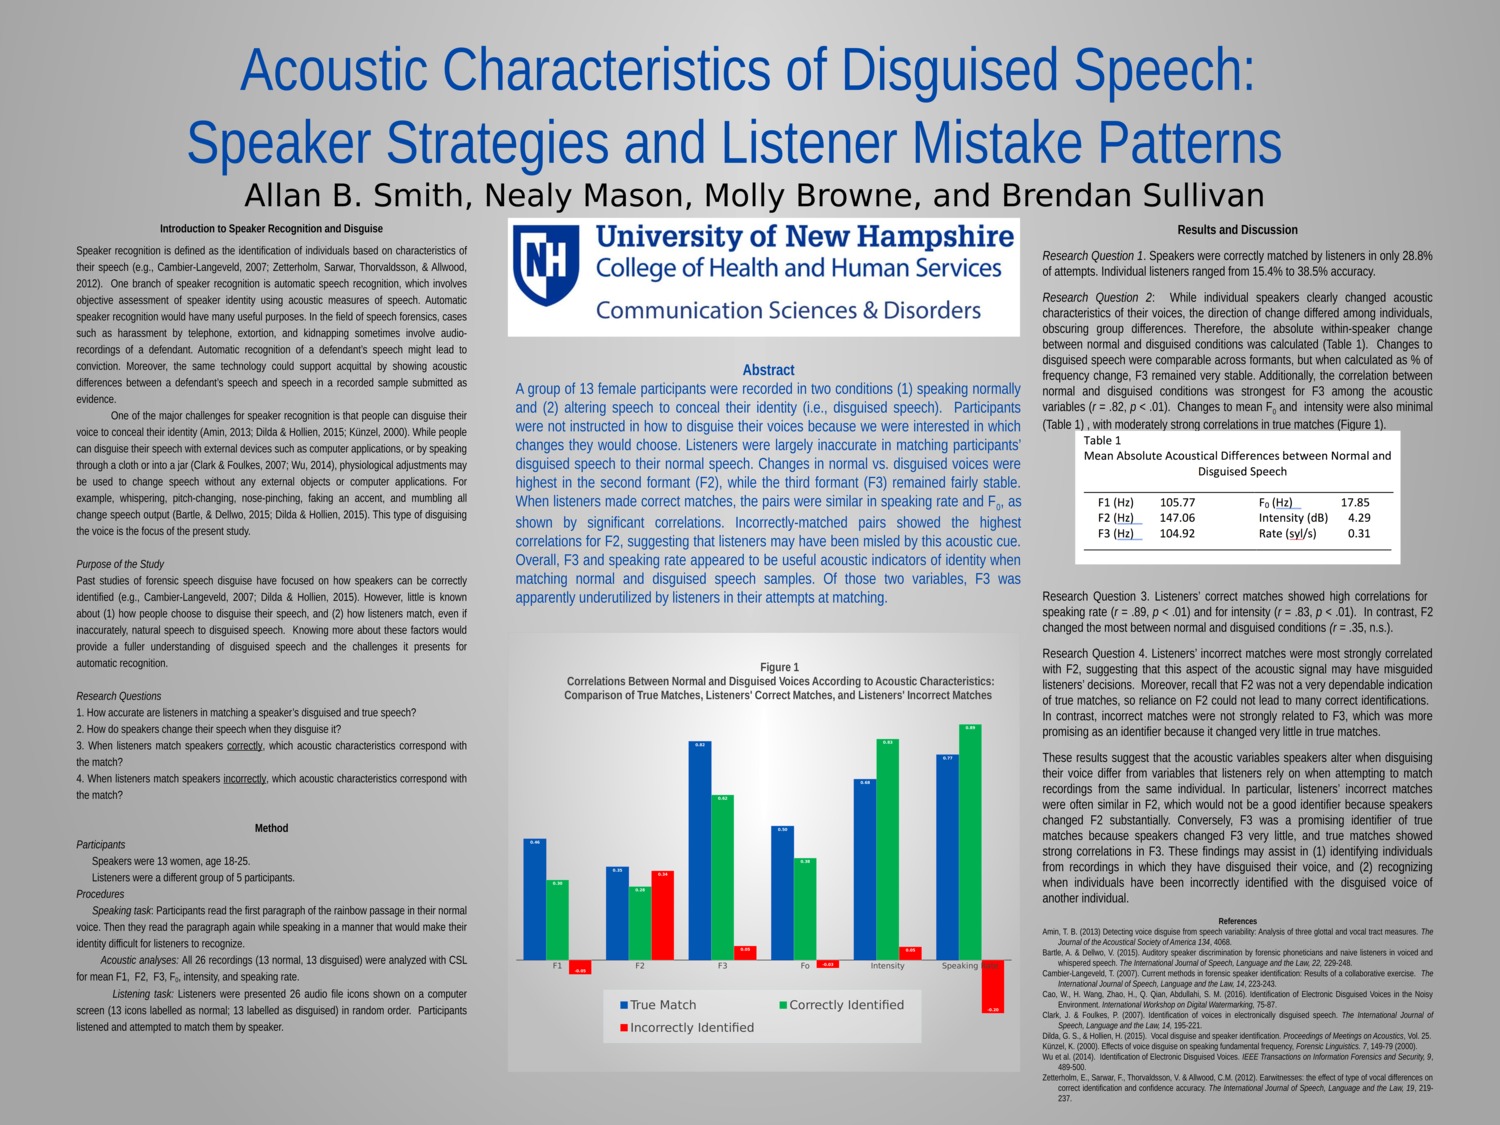 Acoustic Characteristics Of Disguised Speech:Speaker Strategies And Listener Mistake Patterns  by Allan